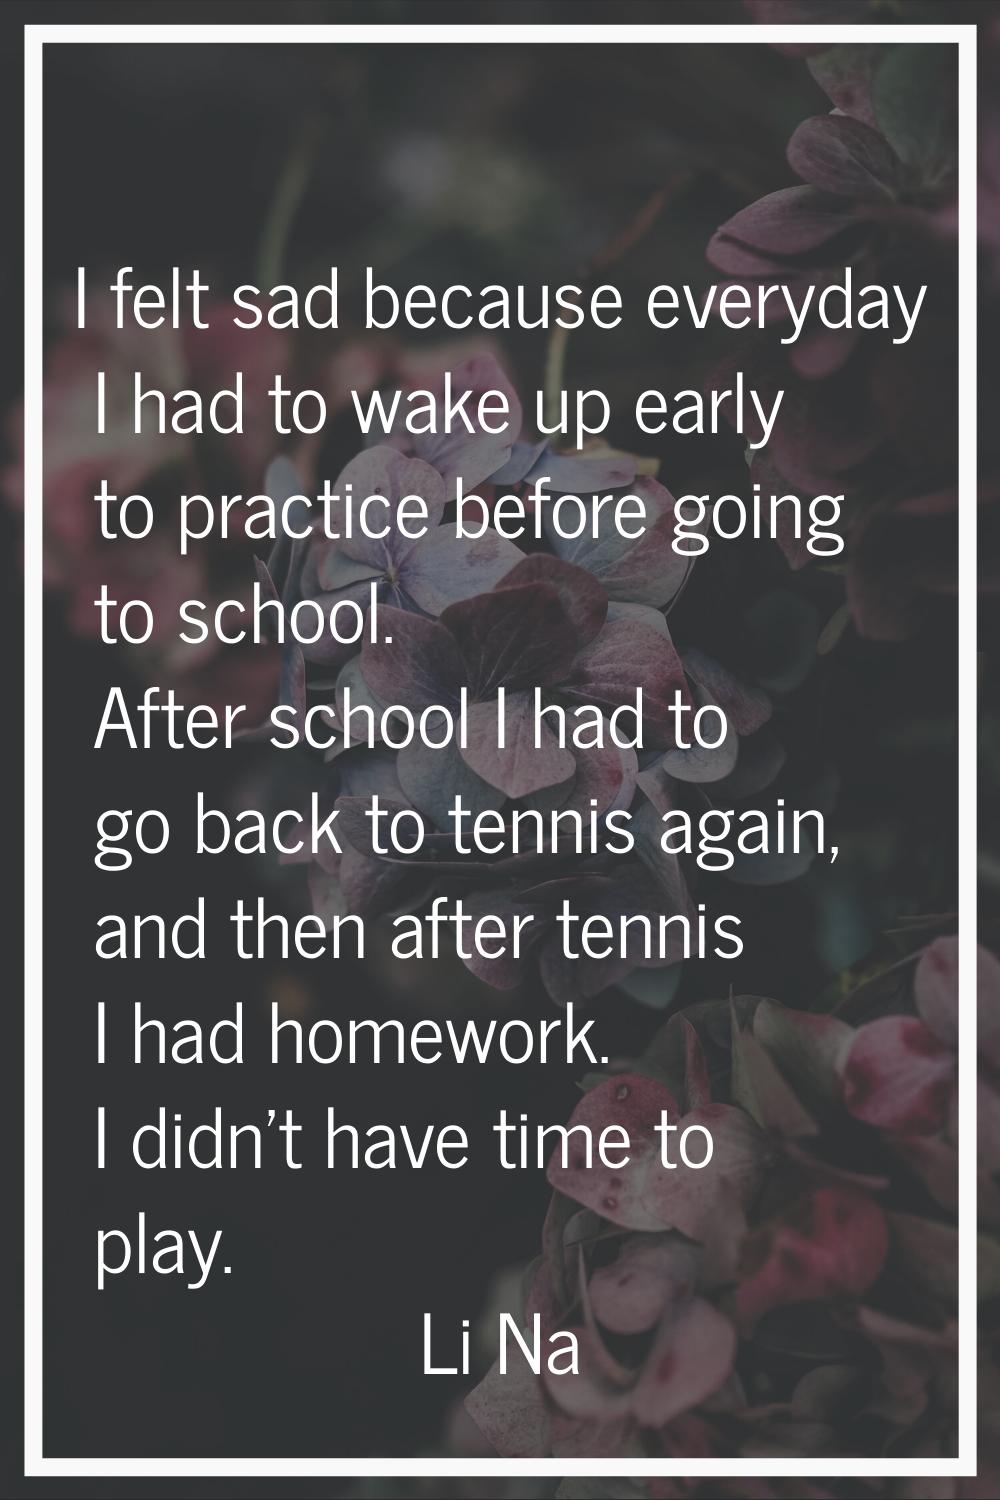 I felt sad because everyday I had to wake up early to practice before going to school. After school